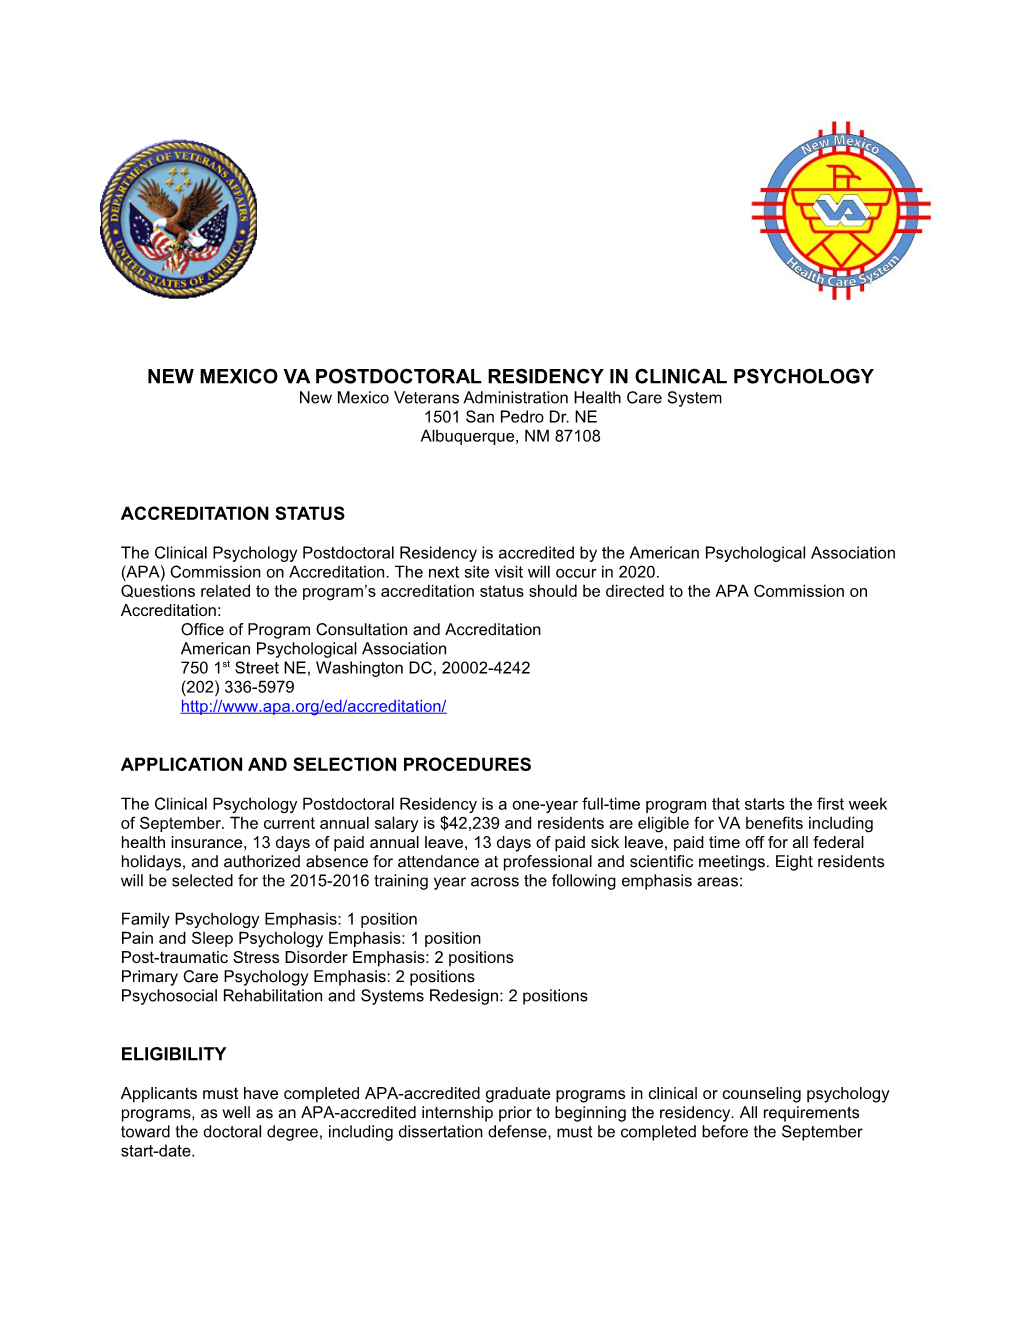 New Mexico VA Postdoctoral Residency in Clinical Psychology